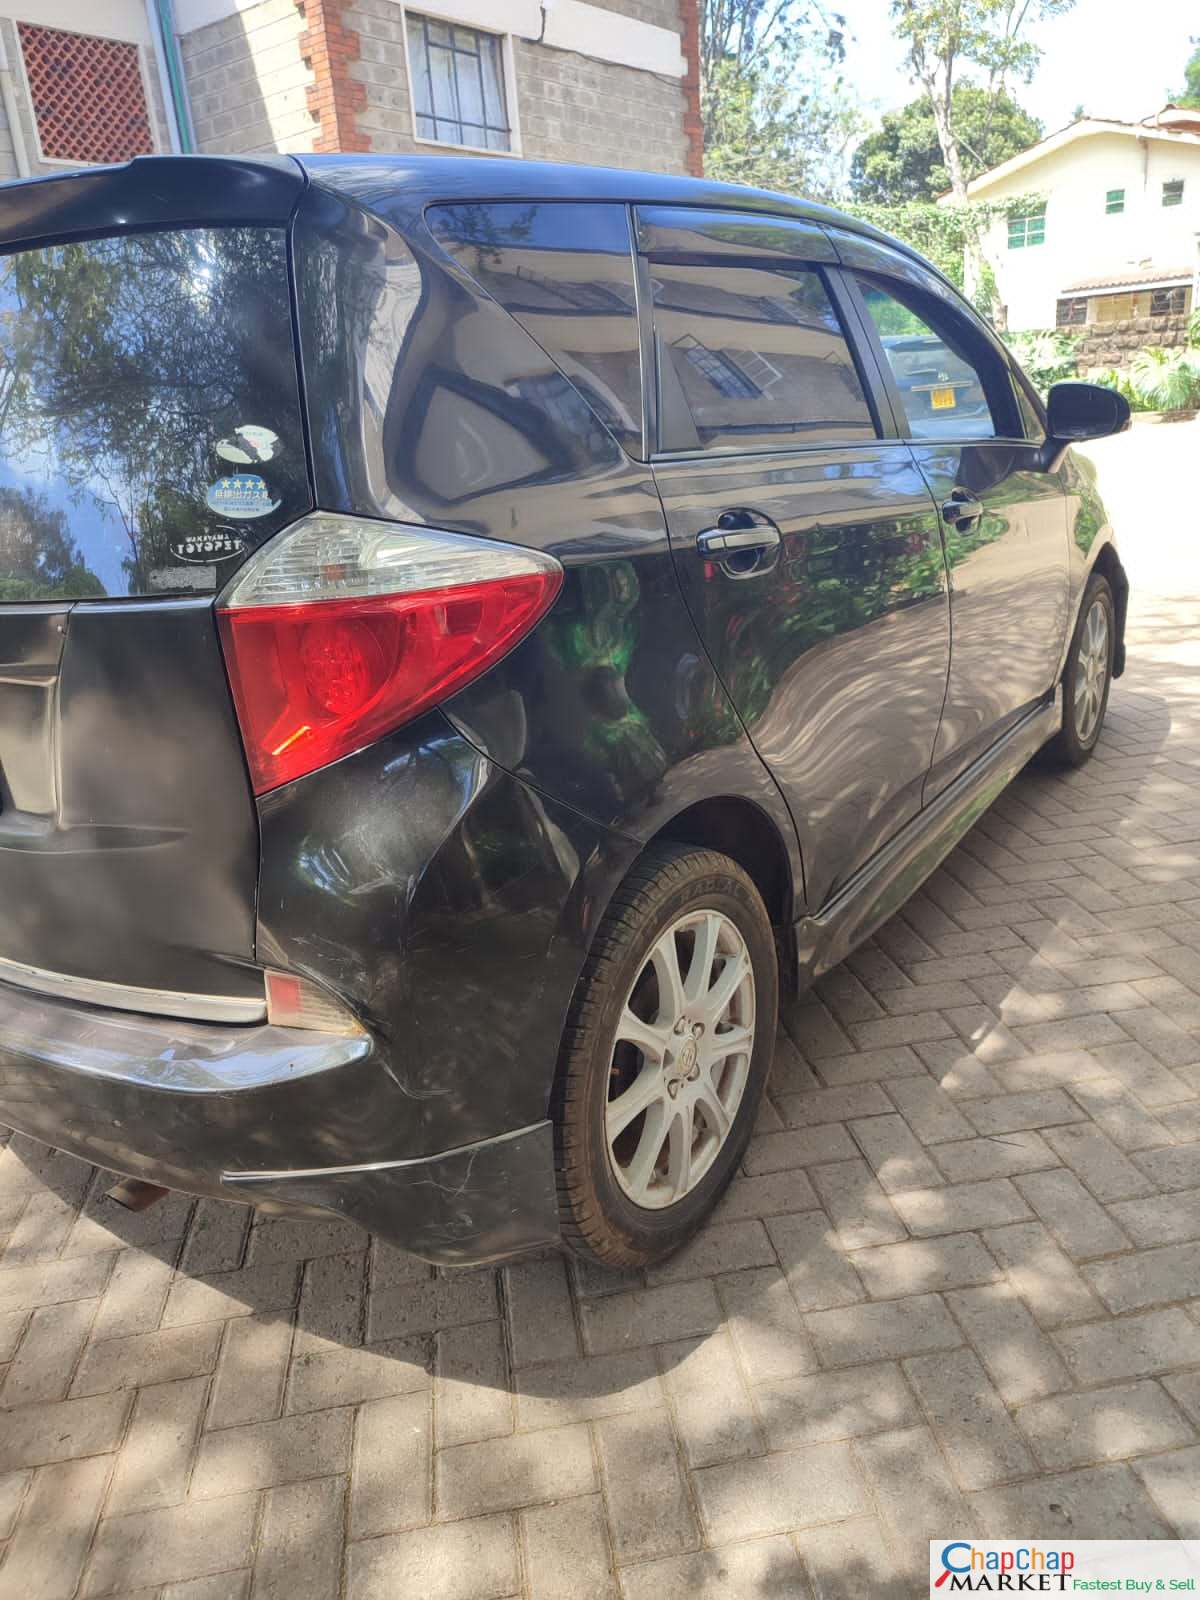 Cars Cars For Sale-Toyota Ractis for sale in kenya HIRE PURCHASE installments You pay Deposit Trade in Ok ractis Kenya EXCLUSIVE 8